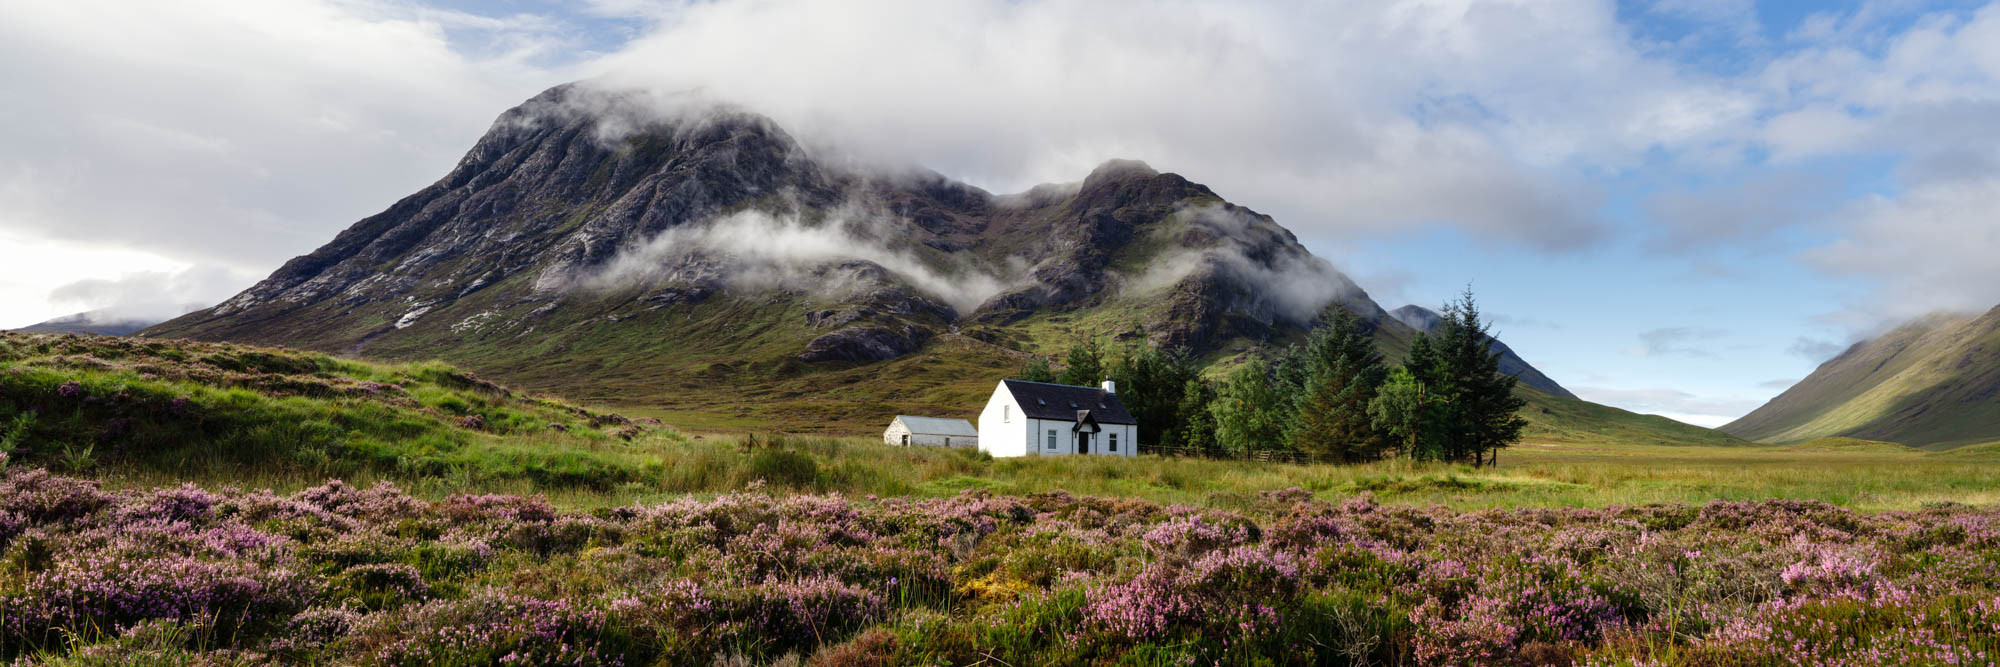 Panorama of a Scottish Cottage amongst the blooming Heather in Glencoe